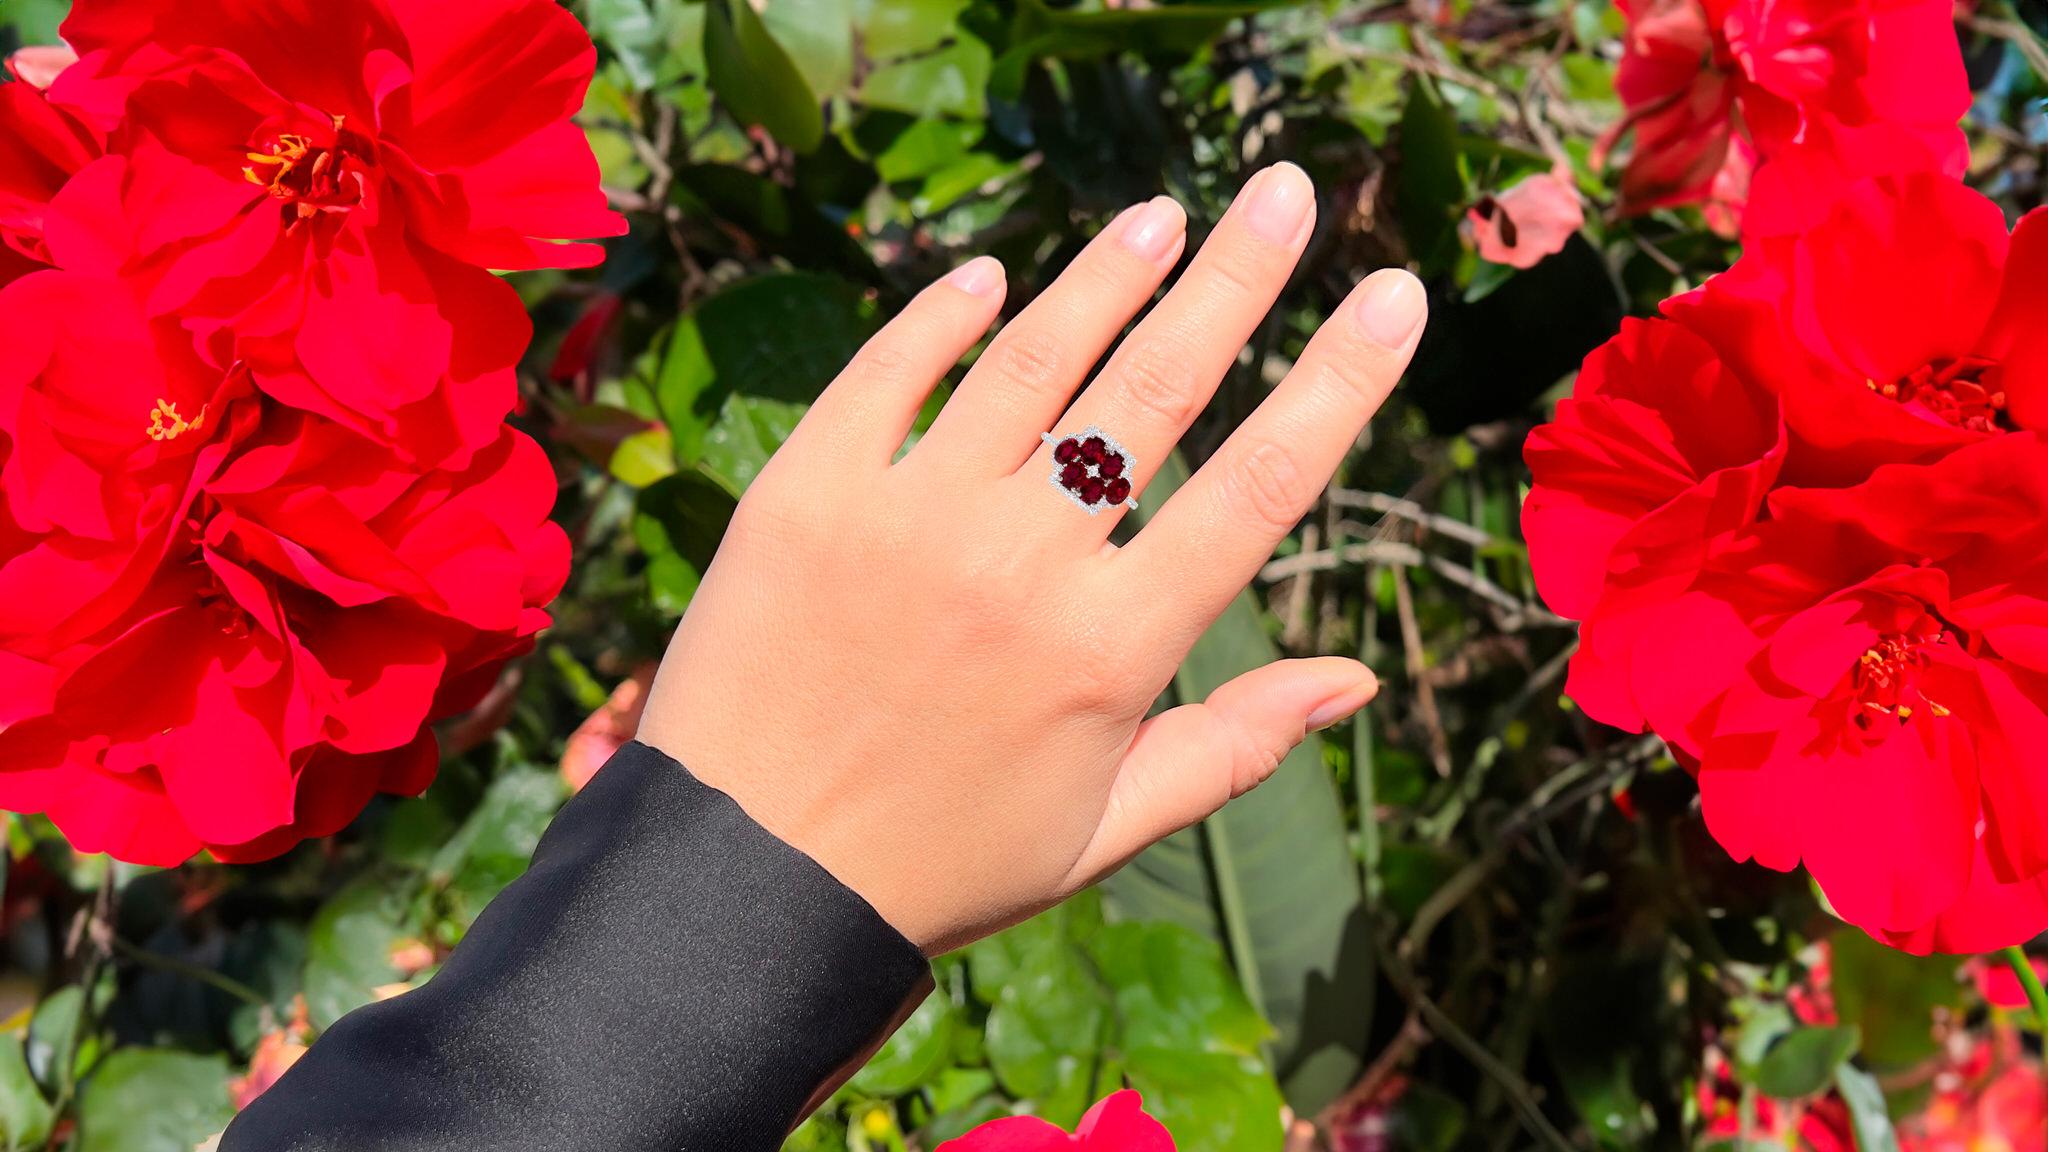 It comes with the Gemological Appraisal by GIA GG/AJP
All Gemstones are Natural
6 Oval Rubies = 2.03 Carats
49 Round Diamonds = 0.30 Carats
Metal: 18K White Gold
Ring Size: 6.5* US
*It can be resized complimentary
